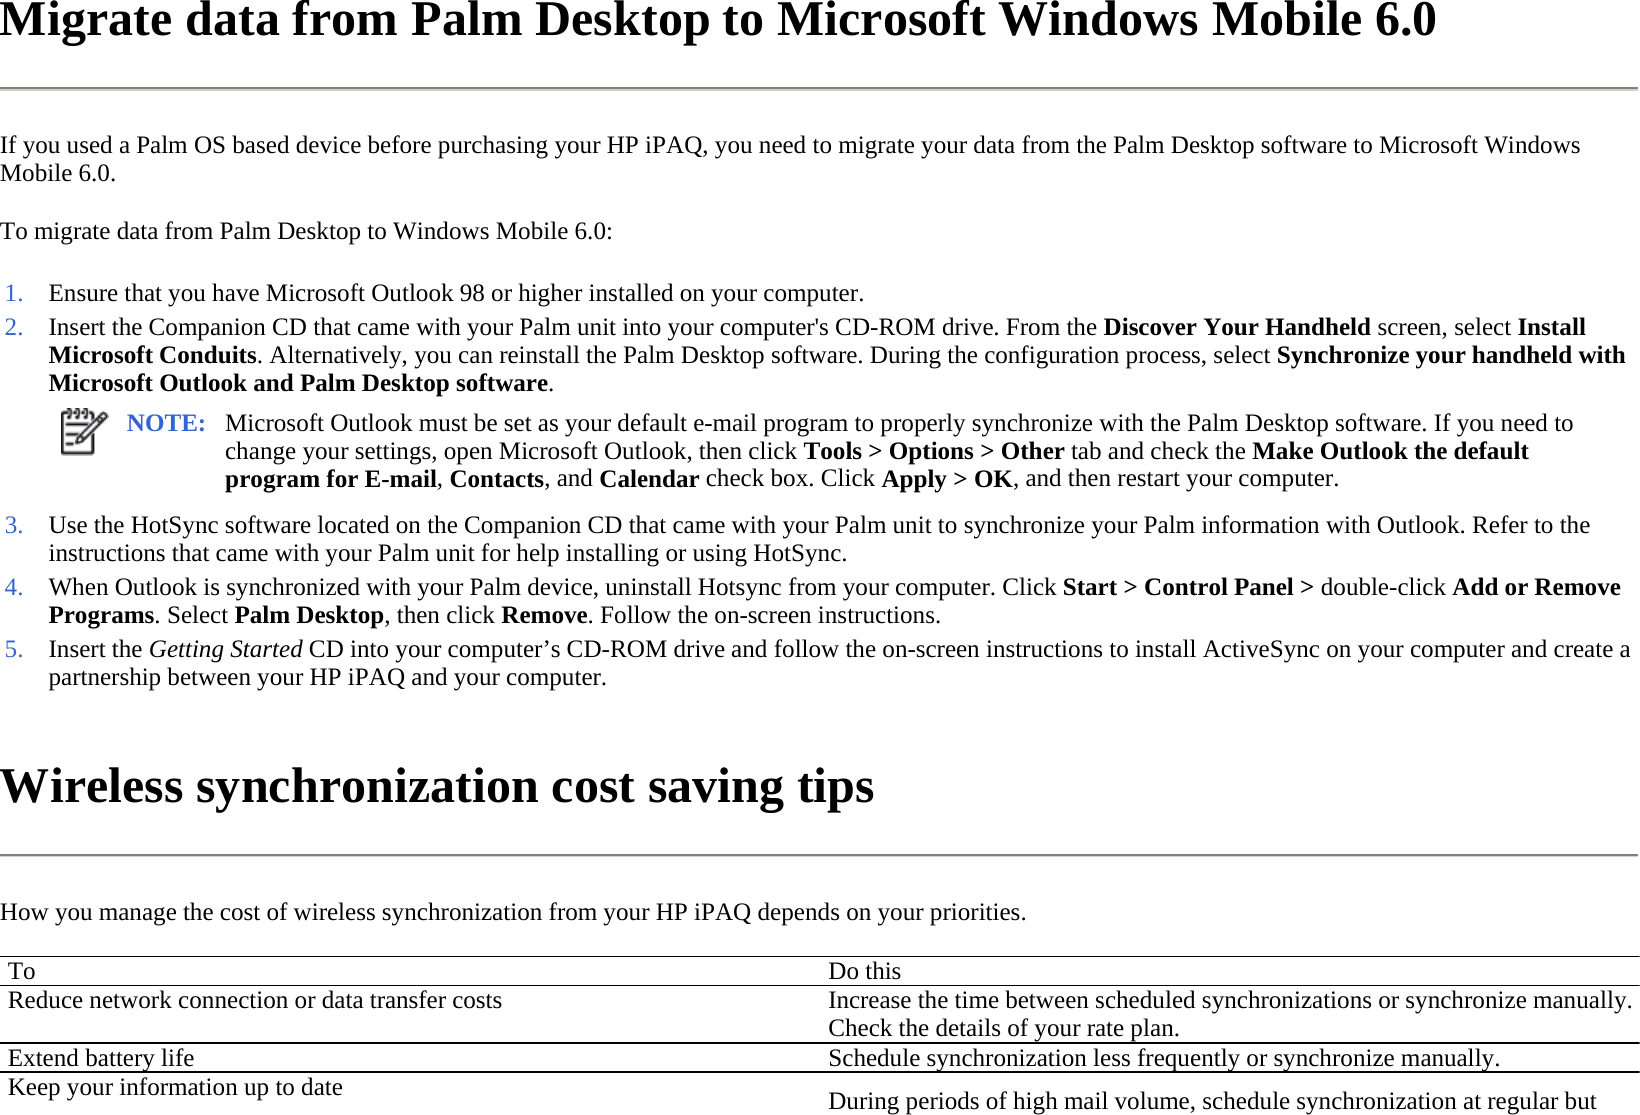 Migrate data from Palm Desktop to Microsoft Windows Mobile 6.0  If you used a Palm OS based device before purchasing your HP iPAQ, you need to migrate your data from the Palm Desktop software to Microsoft Windows Mobile 6.0.  To migrate data from Palm Desktop to Windows Mobile 6.0:  Wireless synchronization cost saving tips  How you manage the cost of wireless synchronization from your HP iPAQ depends on your priorities.  1. Ensure that you have Microsoft Outlook 98 or higher installed on your computer.2. Insert the Companion CD that came with your Palm unit into your computer&apos;s CD-ROM drive. From the Discover Your Handheld screen, select Install Microsoft Conduits. Alternatively, you can reinstall the Palm Desktop software. During the configuration process, select Synchronize your handheld with Microsoft Outlook and Palm Desktop software.NOTE: Microsoft Outlook must be set as your default e-mail program to properly synchronize with the Palm Desktop software. If you need to change your settings, open Microsoft Outlook, then click Tools &gt; Options &gt; Other tab and check the Make Outlook the default program for E-mail, Contacts, and Calendar check box. Click Apply &gt; OK, and then restart your computer.  3. Use the HotSync software located on the Companion CD that came with your Palm unit to synchronize your Palm information with Outlook. Refer to the instructions that came with your Palm unit for help installing or using HotSync.4. When Outlook is synchronized with your Palm device, uninstall Hotsync from your computer. Click Start &gt; Control Panel &gt; double-click Add or Remove Programs. SelectPalm Desktop, then click Remove. Follow the on-screen instructions. 5. Insert the Getting Started CD into your computer’s CD-ROM drive and follow the on-screen instructions to install ActiveSync on your computer and create a partnership between your HP iPAQ and your computer.To Do thisReduce network connection or data transfer costs Increase the time between scheduled synchronizations or synchronize manually. Check the details of your rate plan.Extend battery life  Schedule synchronization less frequently or synchronize manually. Keep your information up to date  During periods of high mail volume, schedule synchronization at regular but 